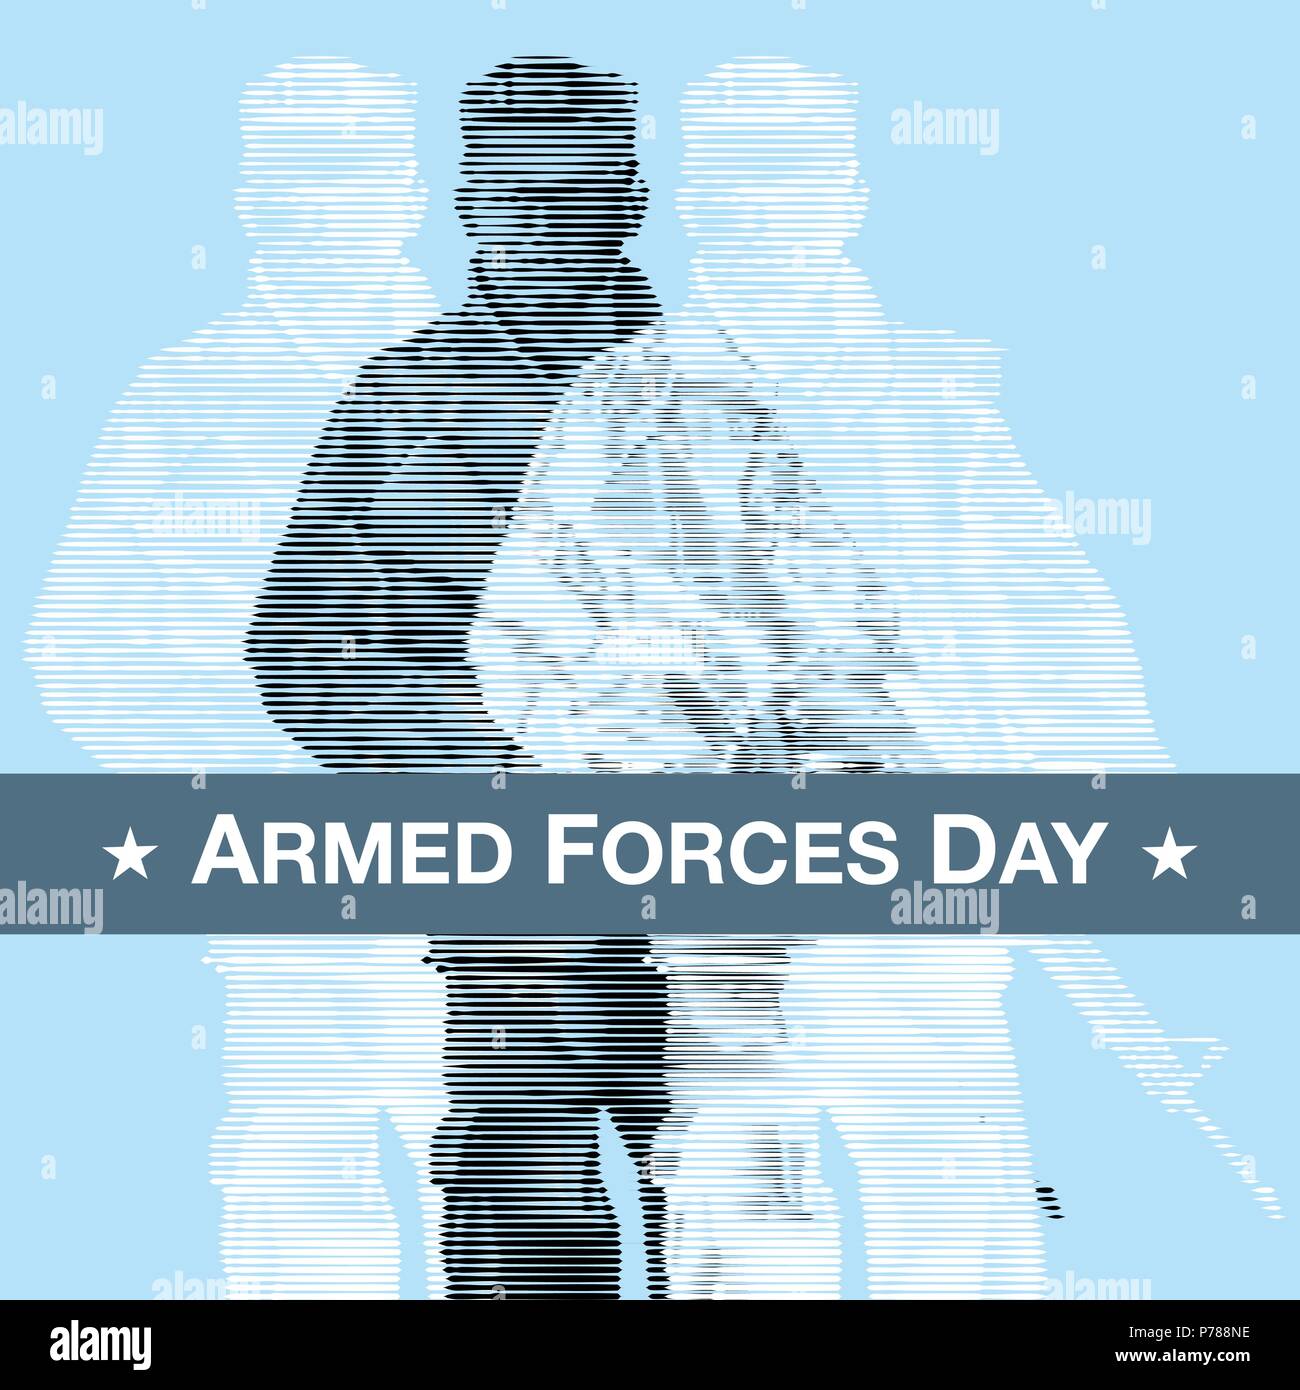 Armed forces day with soldier engrave style template poster design. Stock Vector